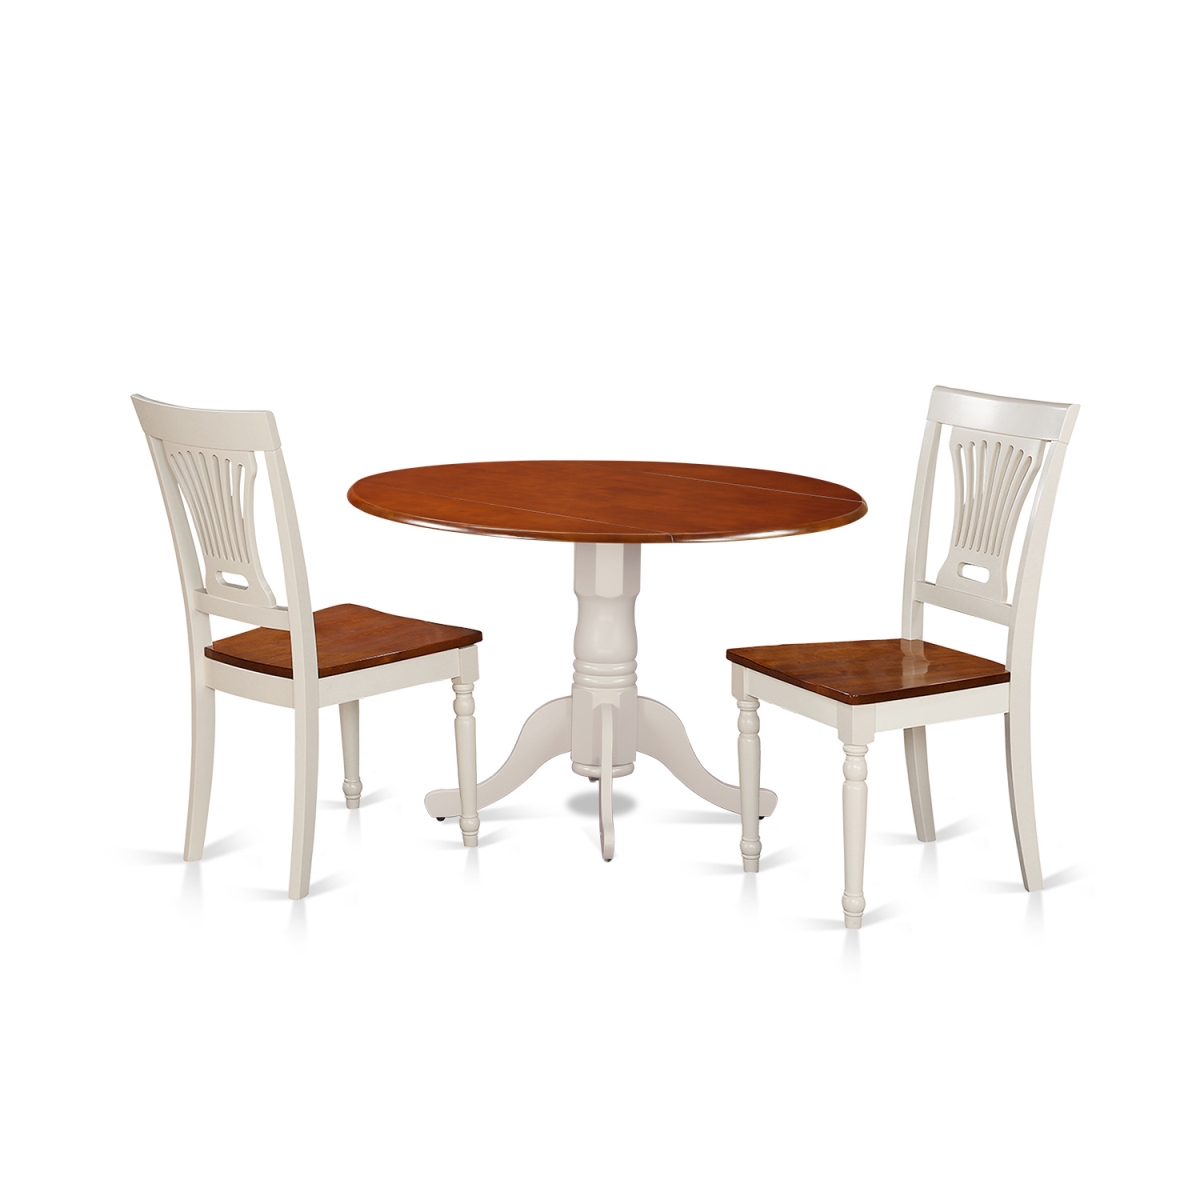 Picture of East West Furniture DLPL3-BMK-W Small Dining Set - Table & 2 Chairs, Buttermilk & Cherry - 3 Piece